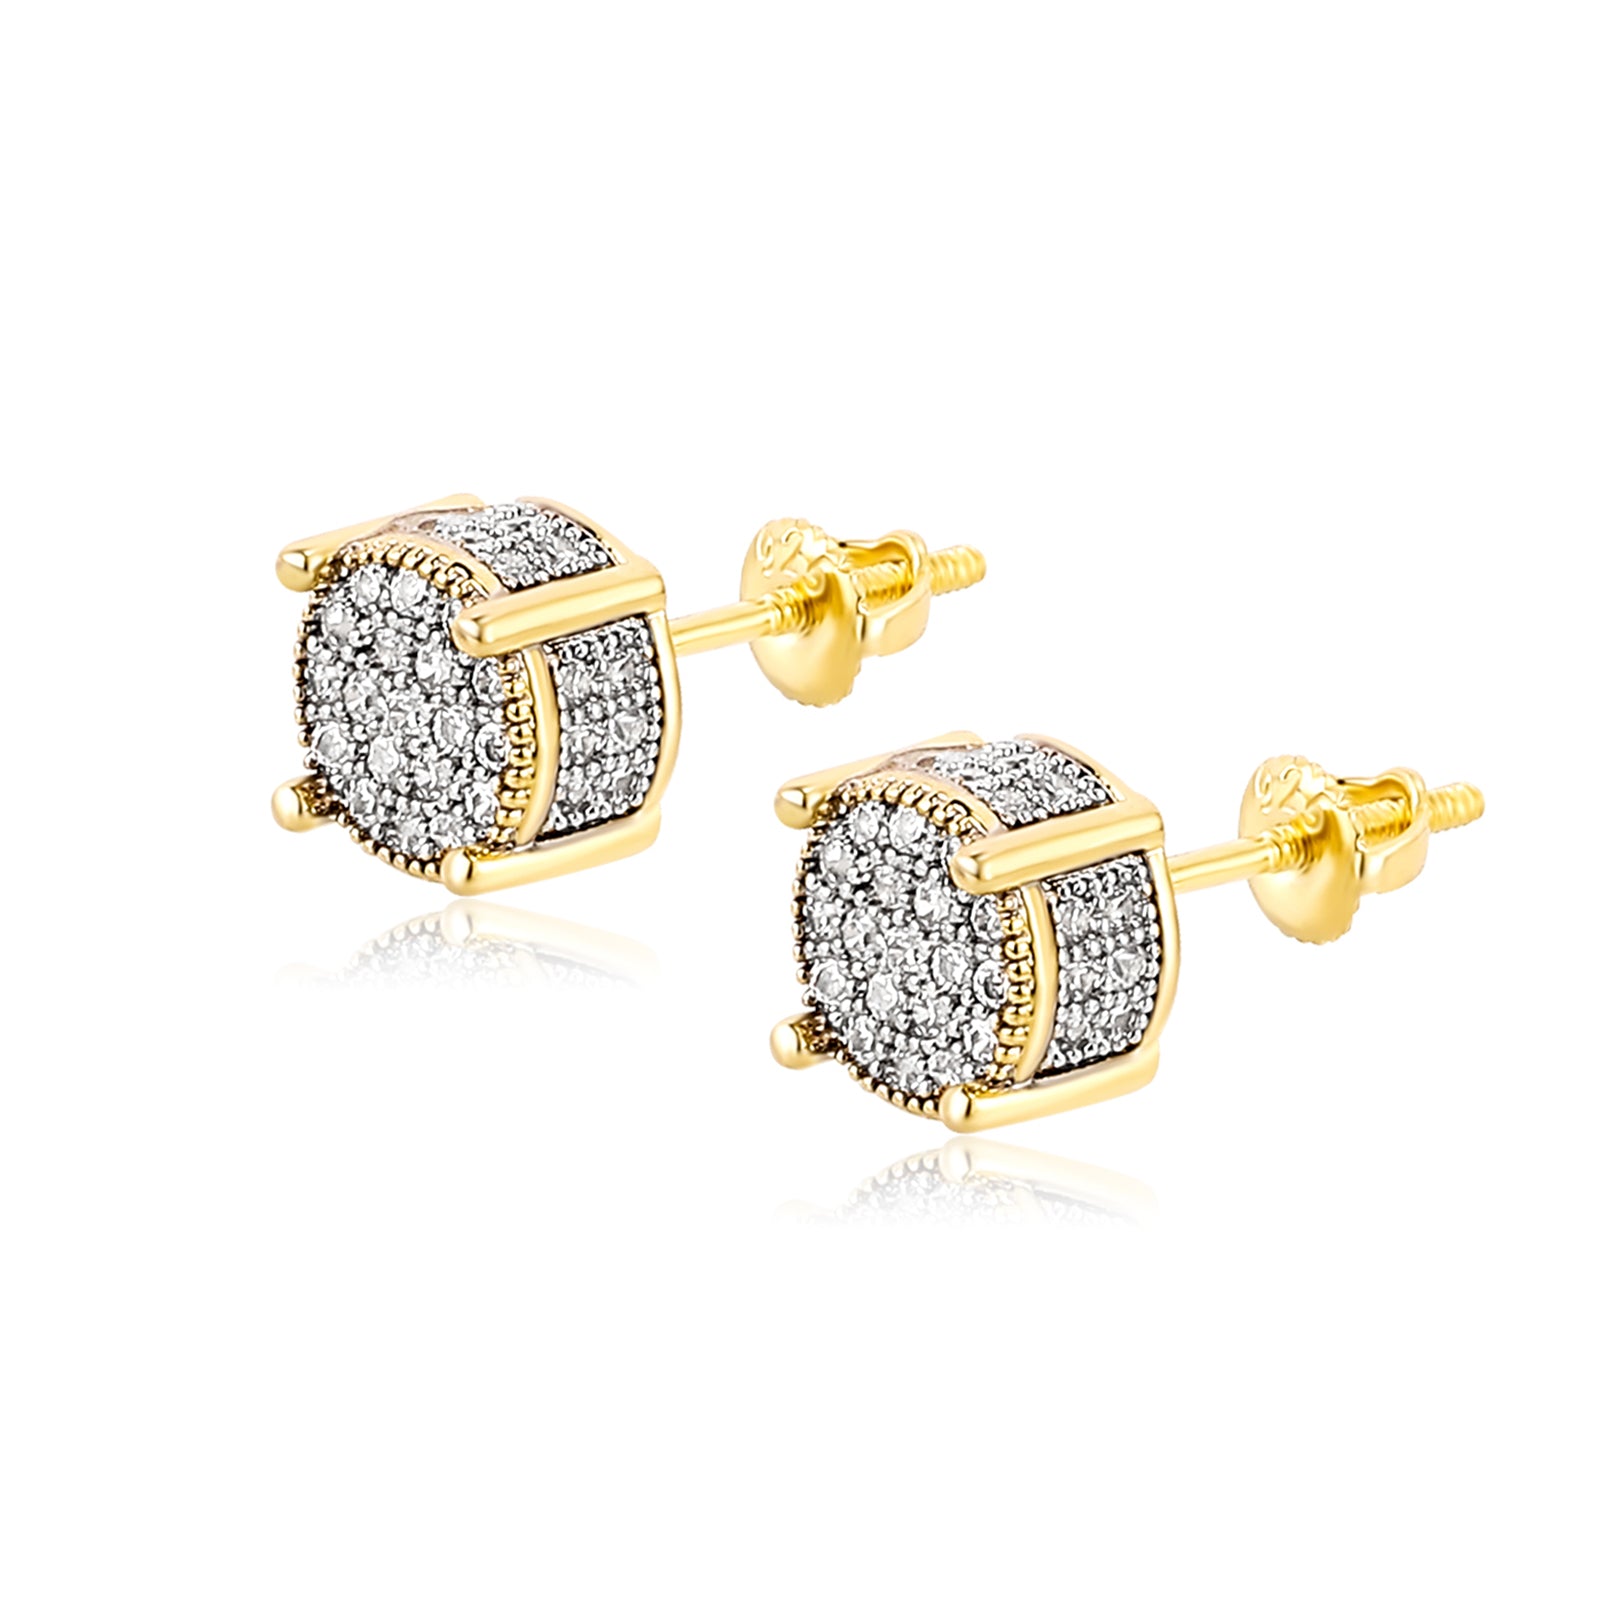 TOPGRILLZ 14K Gold and Silver Plated Iced out CZ Cluster Round Bling Screw Back Stud Earrings for Men and Women Hip Hop Jewelry